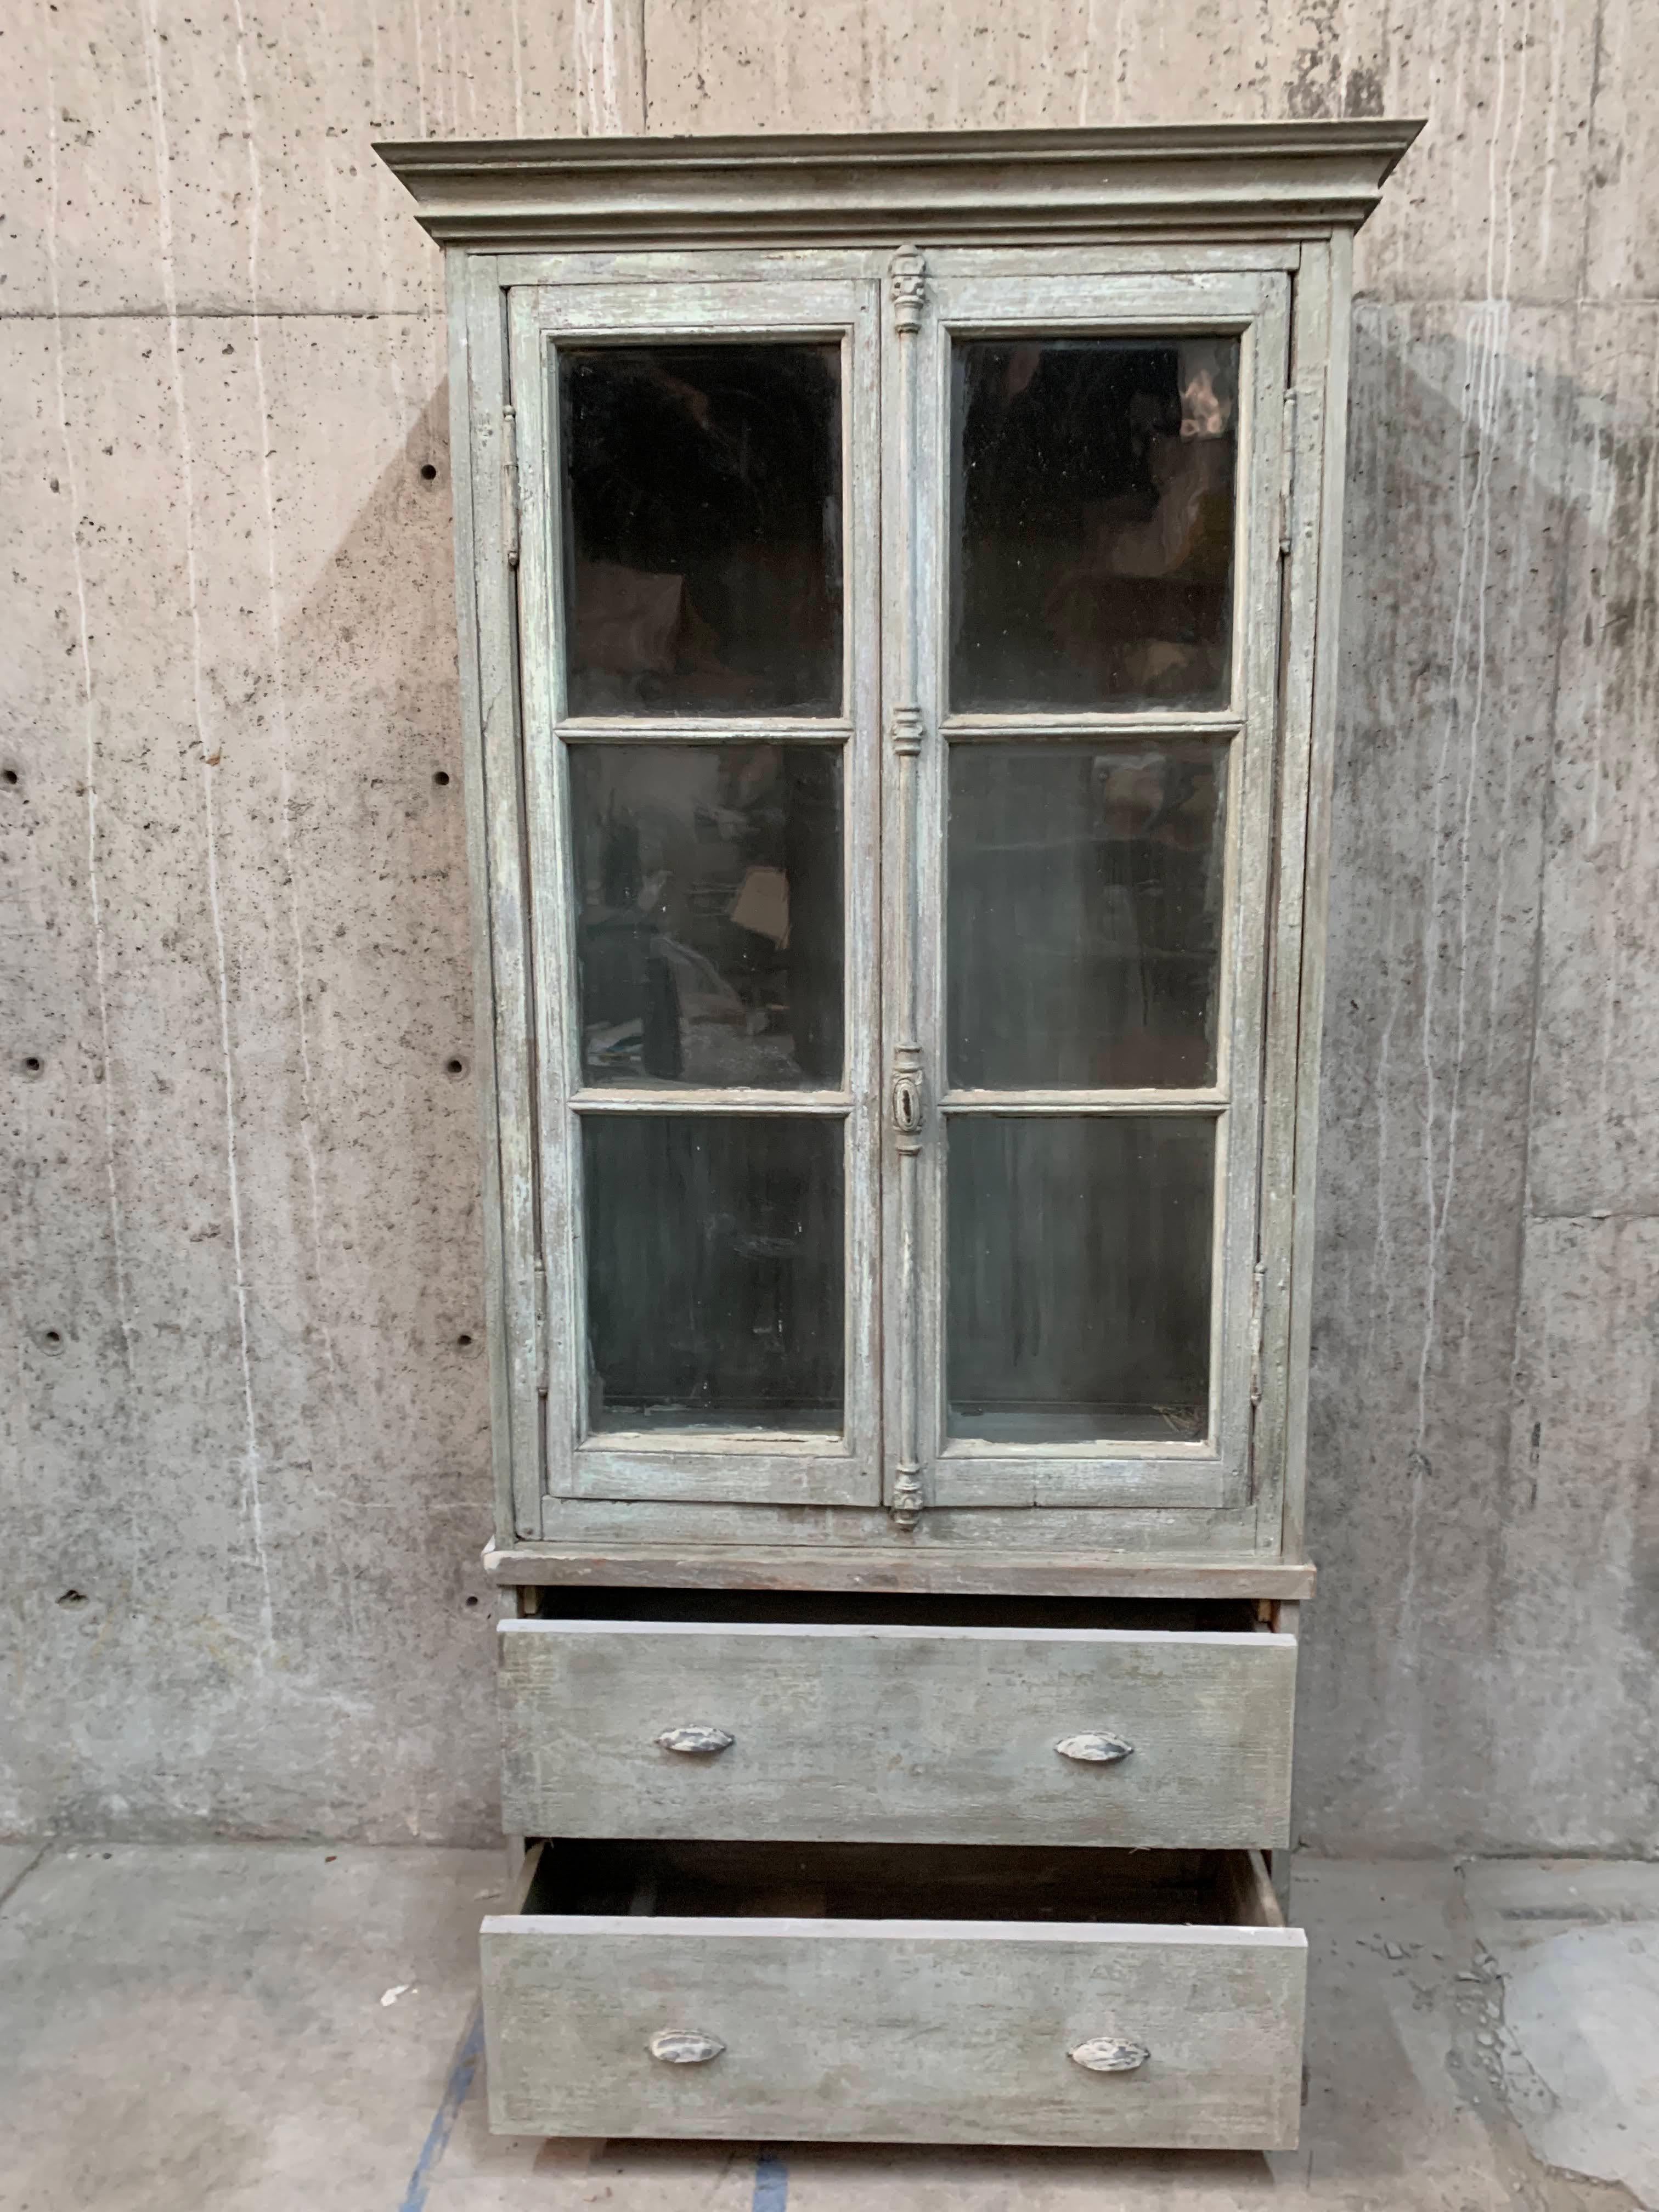 Late 19th Century Vintage French Painted Bookcase With Window Doors In Good Condition For Sale In Sheridan, CO